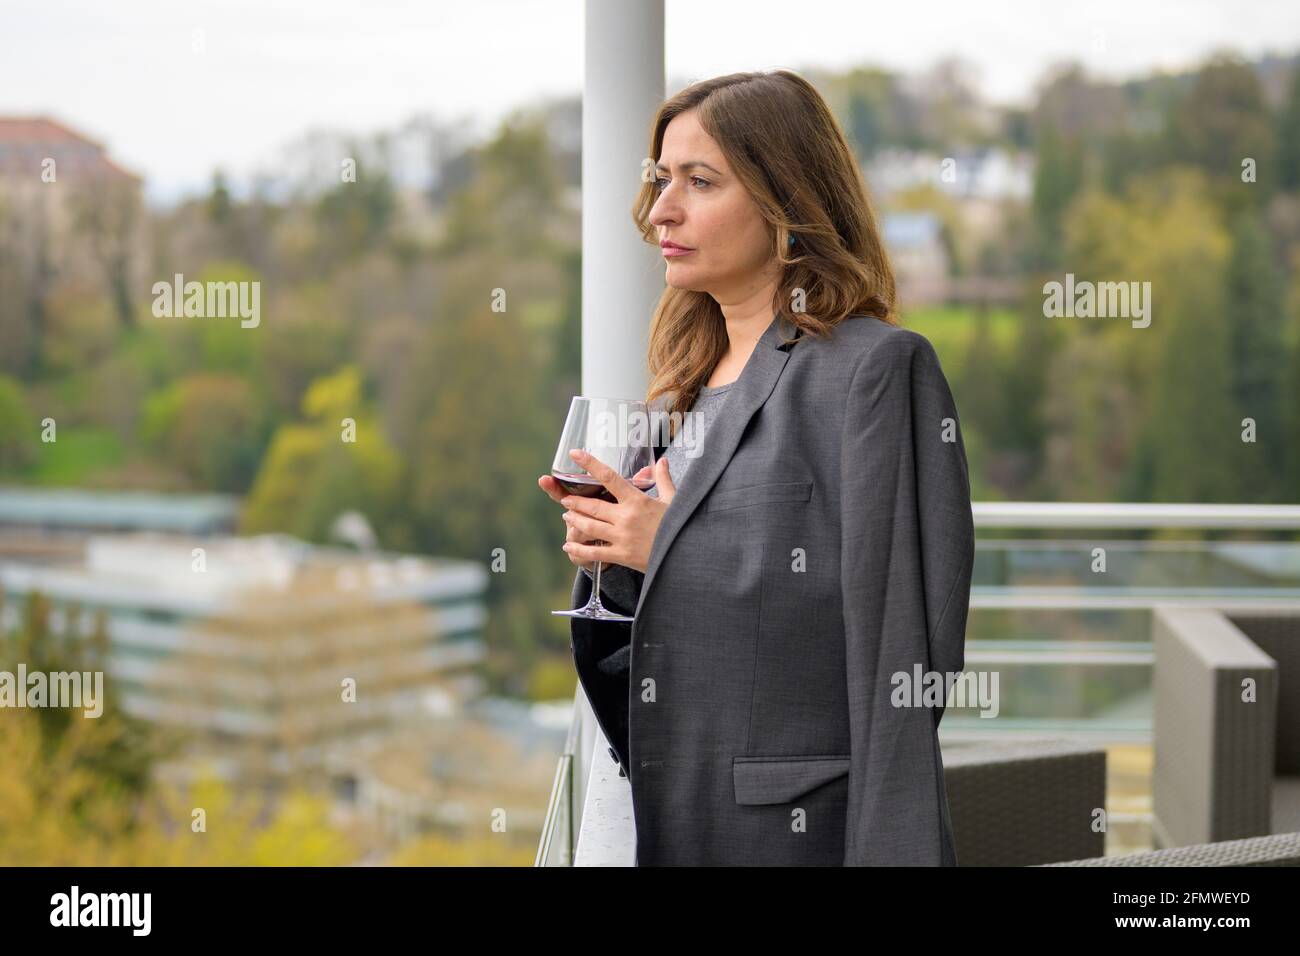 Serious withdrawn middle-aged woman looking aside as she stands on a balcony with a glass of wine and her husbands suit jacket over her shoulders Stock Photo